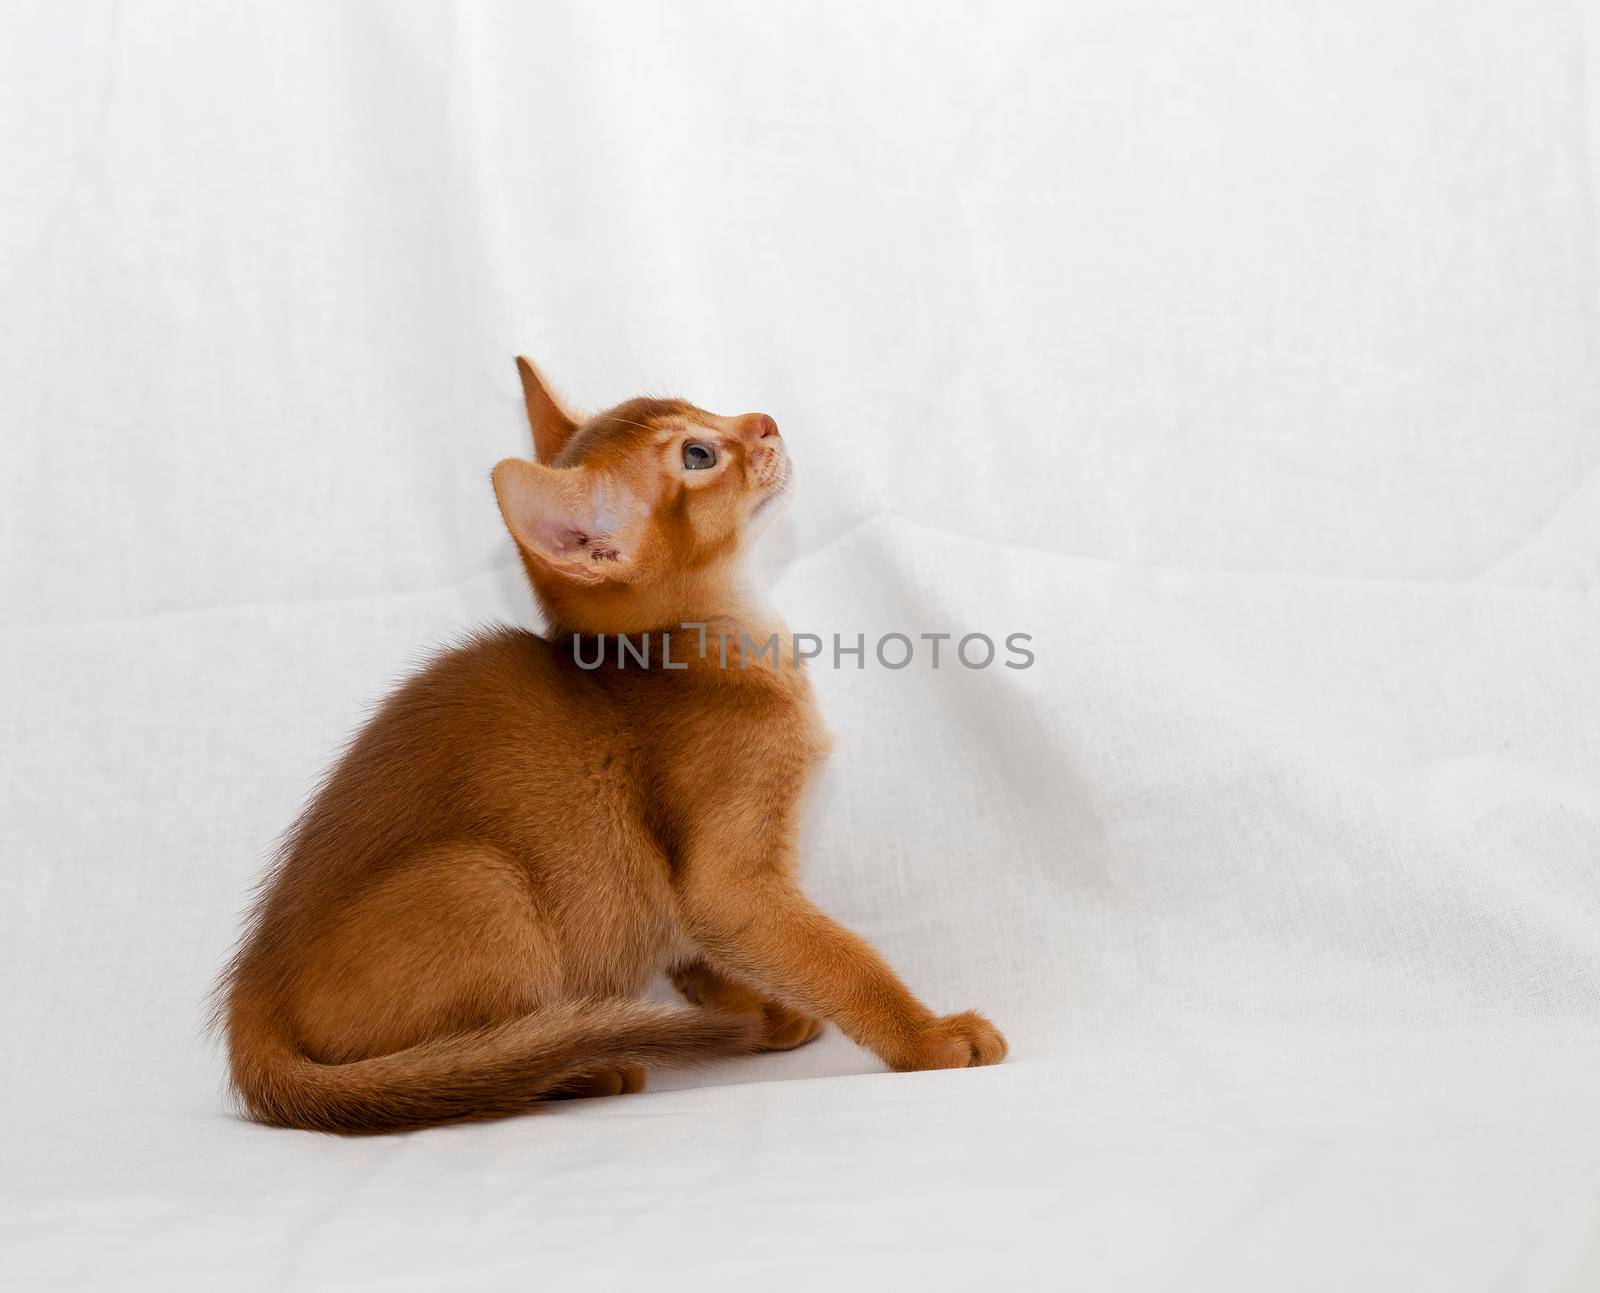 Abyssinian cat sitting on a white ,old material during the game and viewing the subject from above, close-up